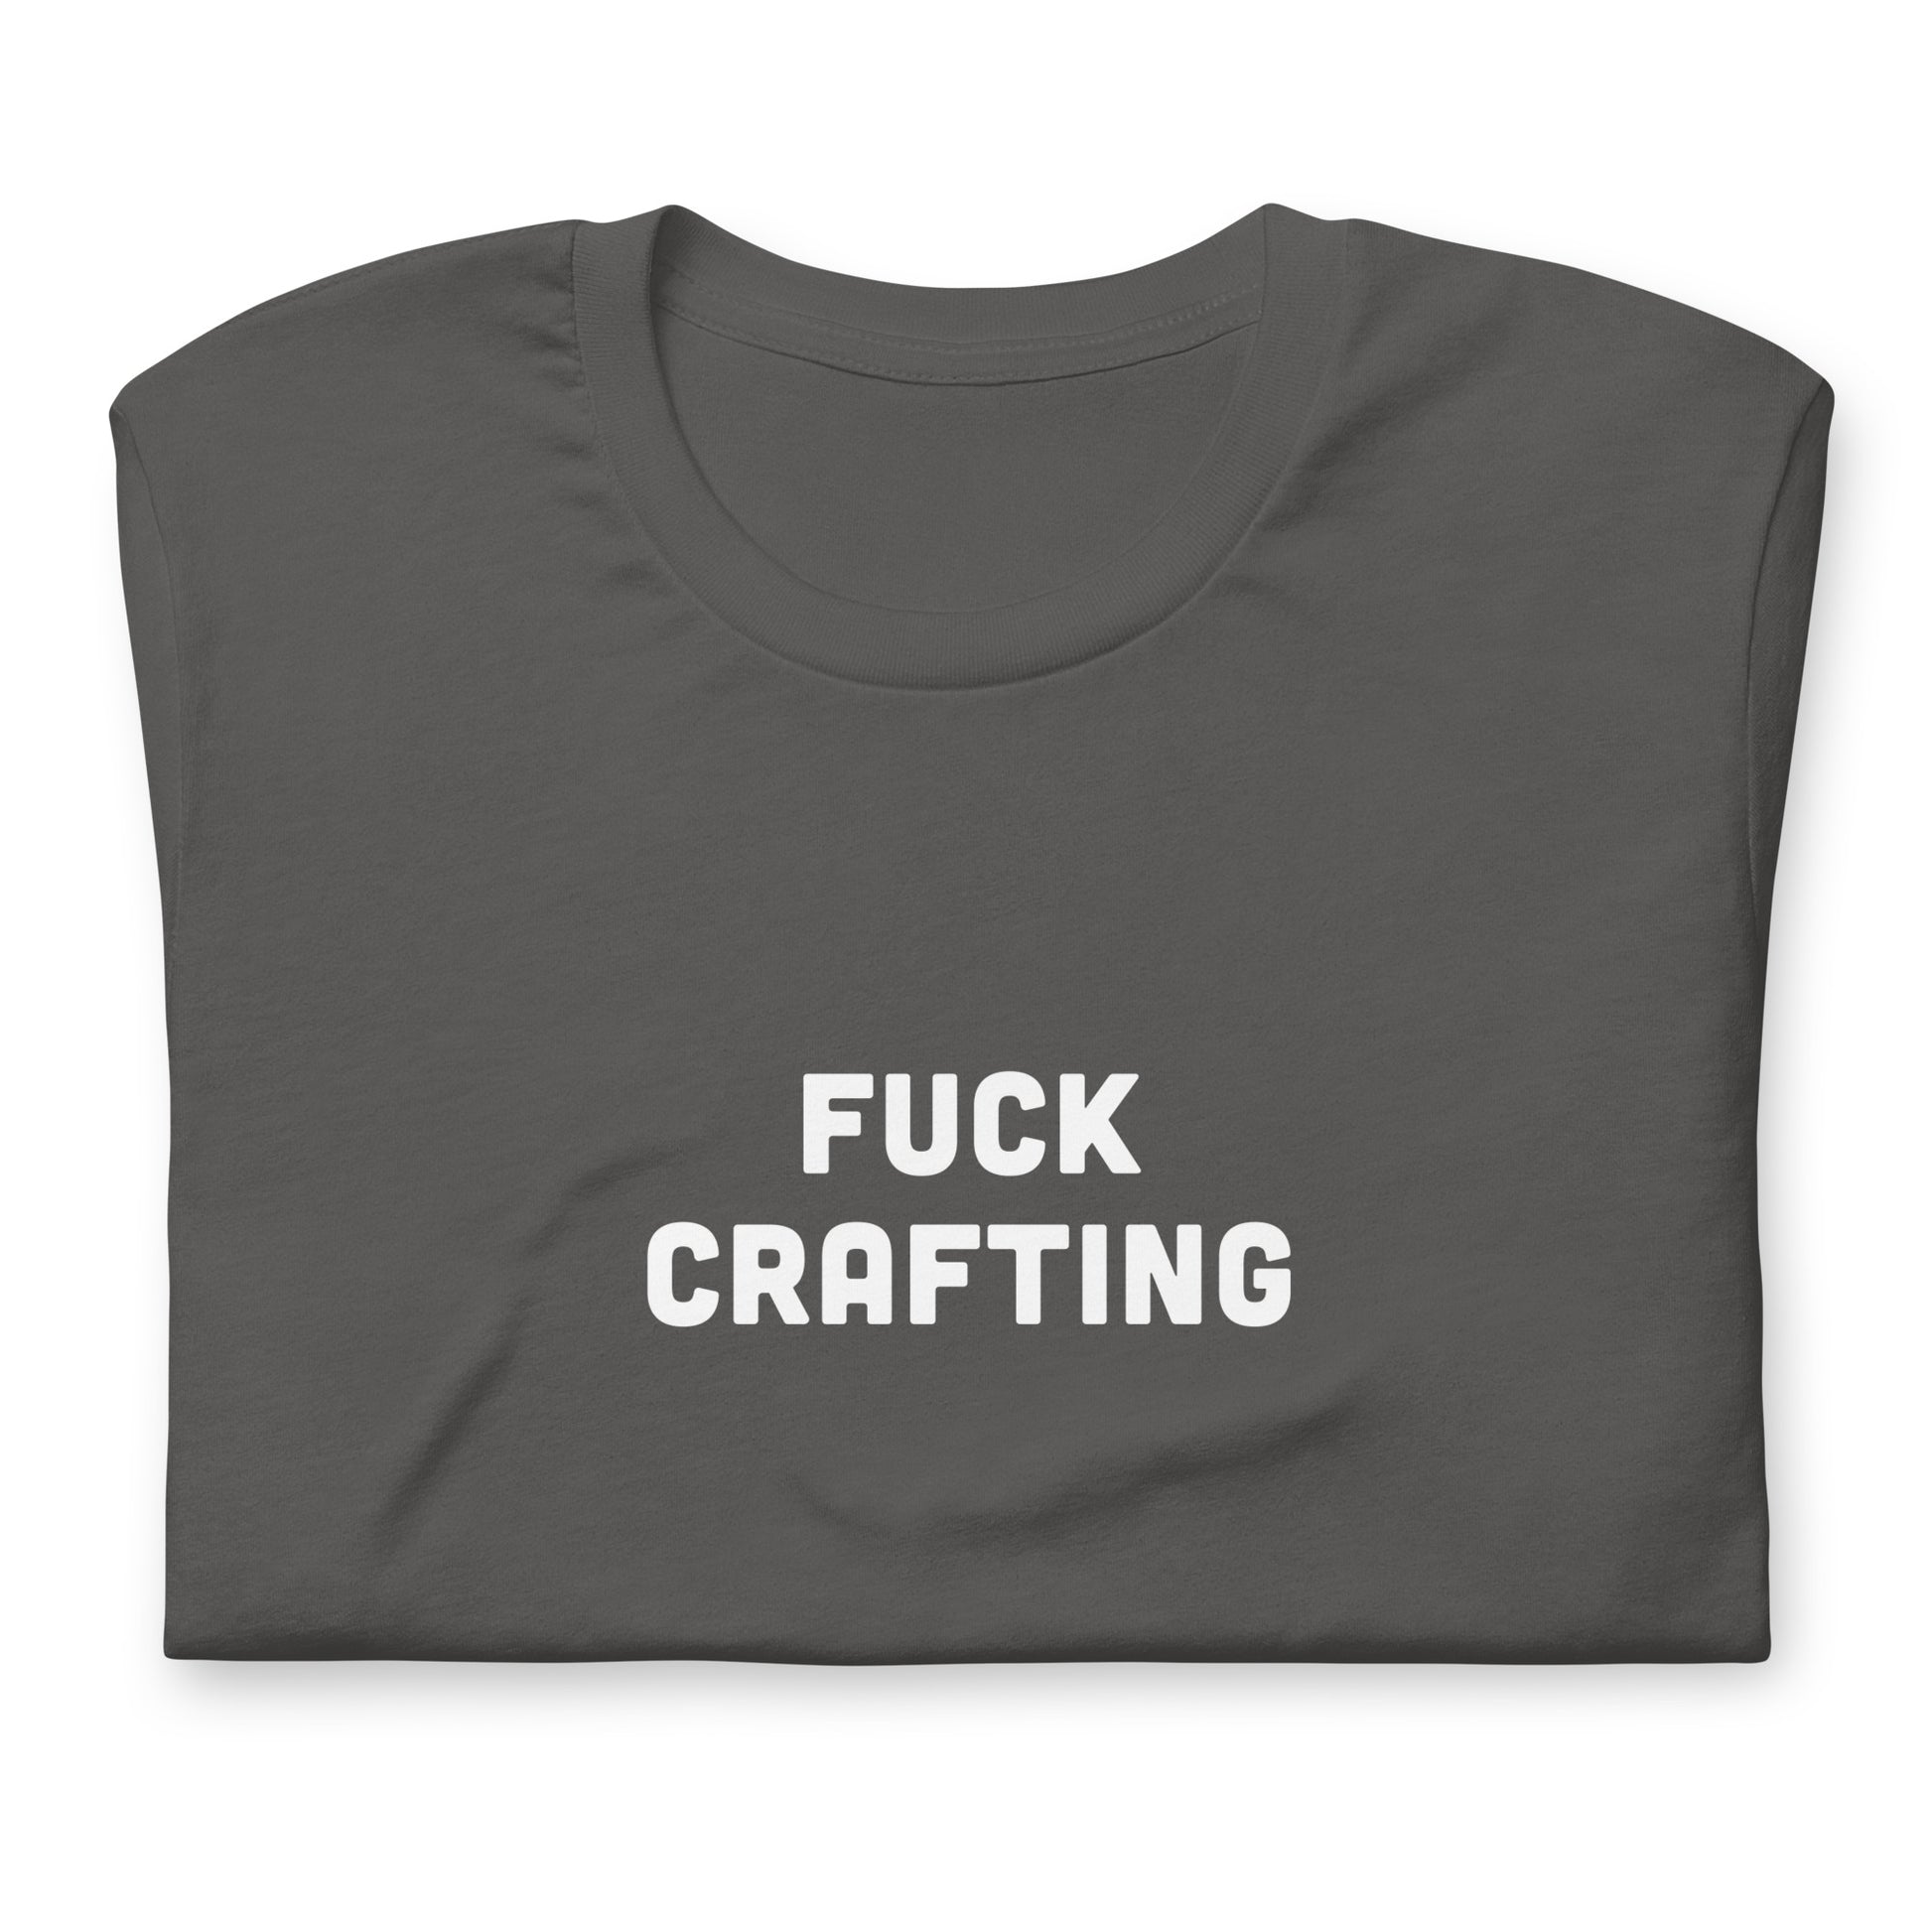 Fuck Crafting T-Shirt Size 2XL Color Black